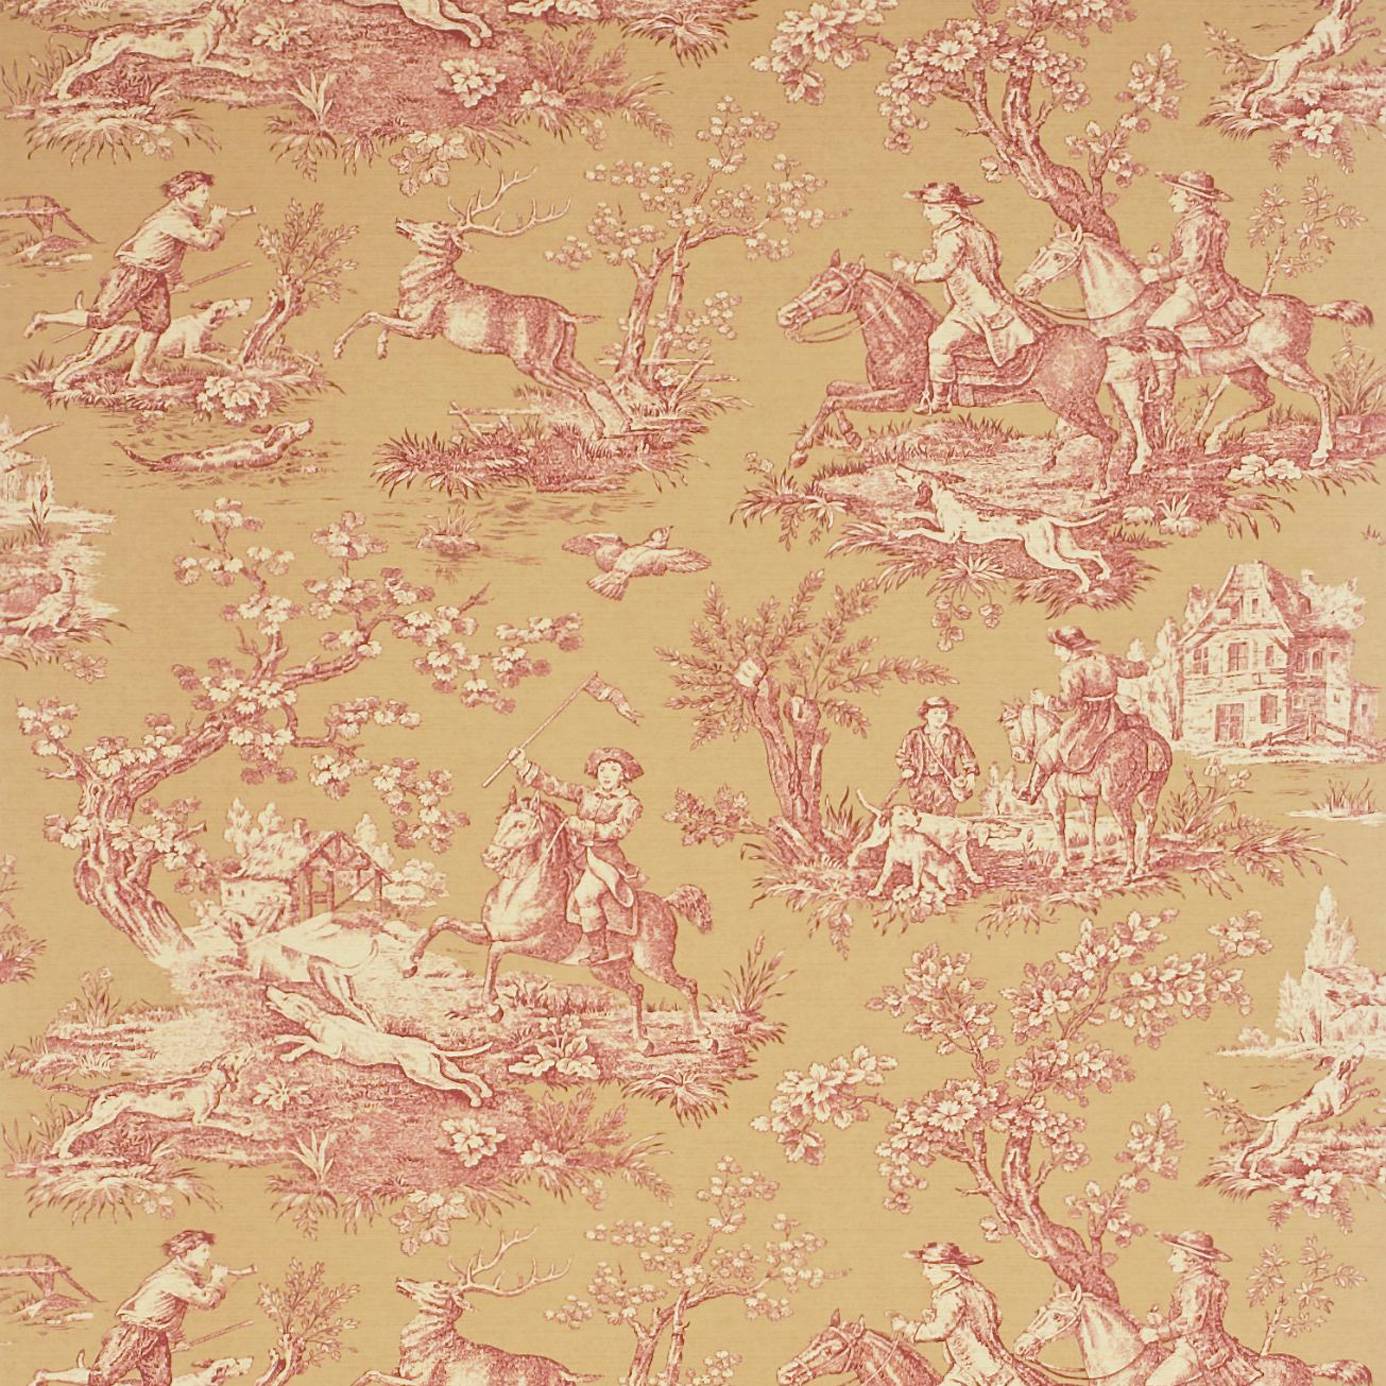 Sanderson Toile Wallpaper Stag Hunting Biscuit Red Honey